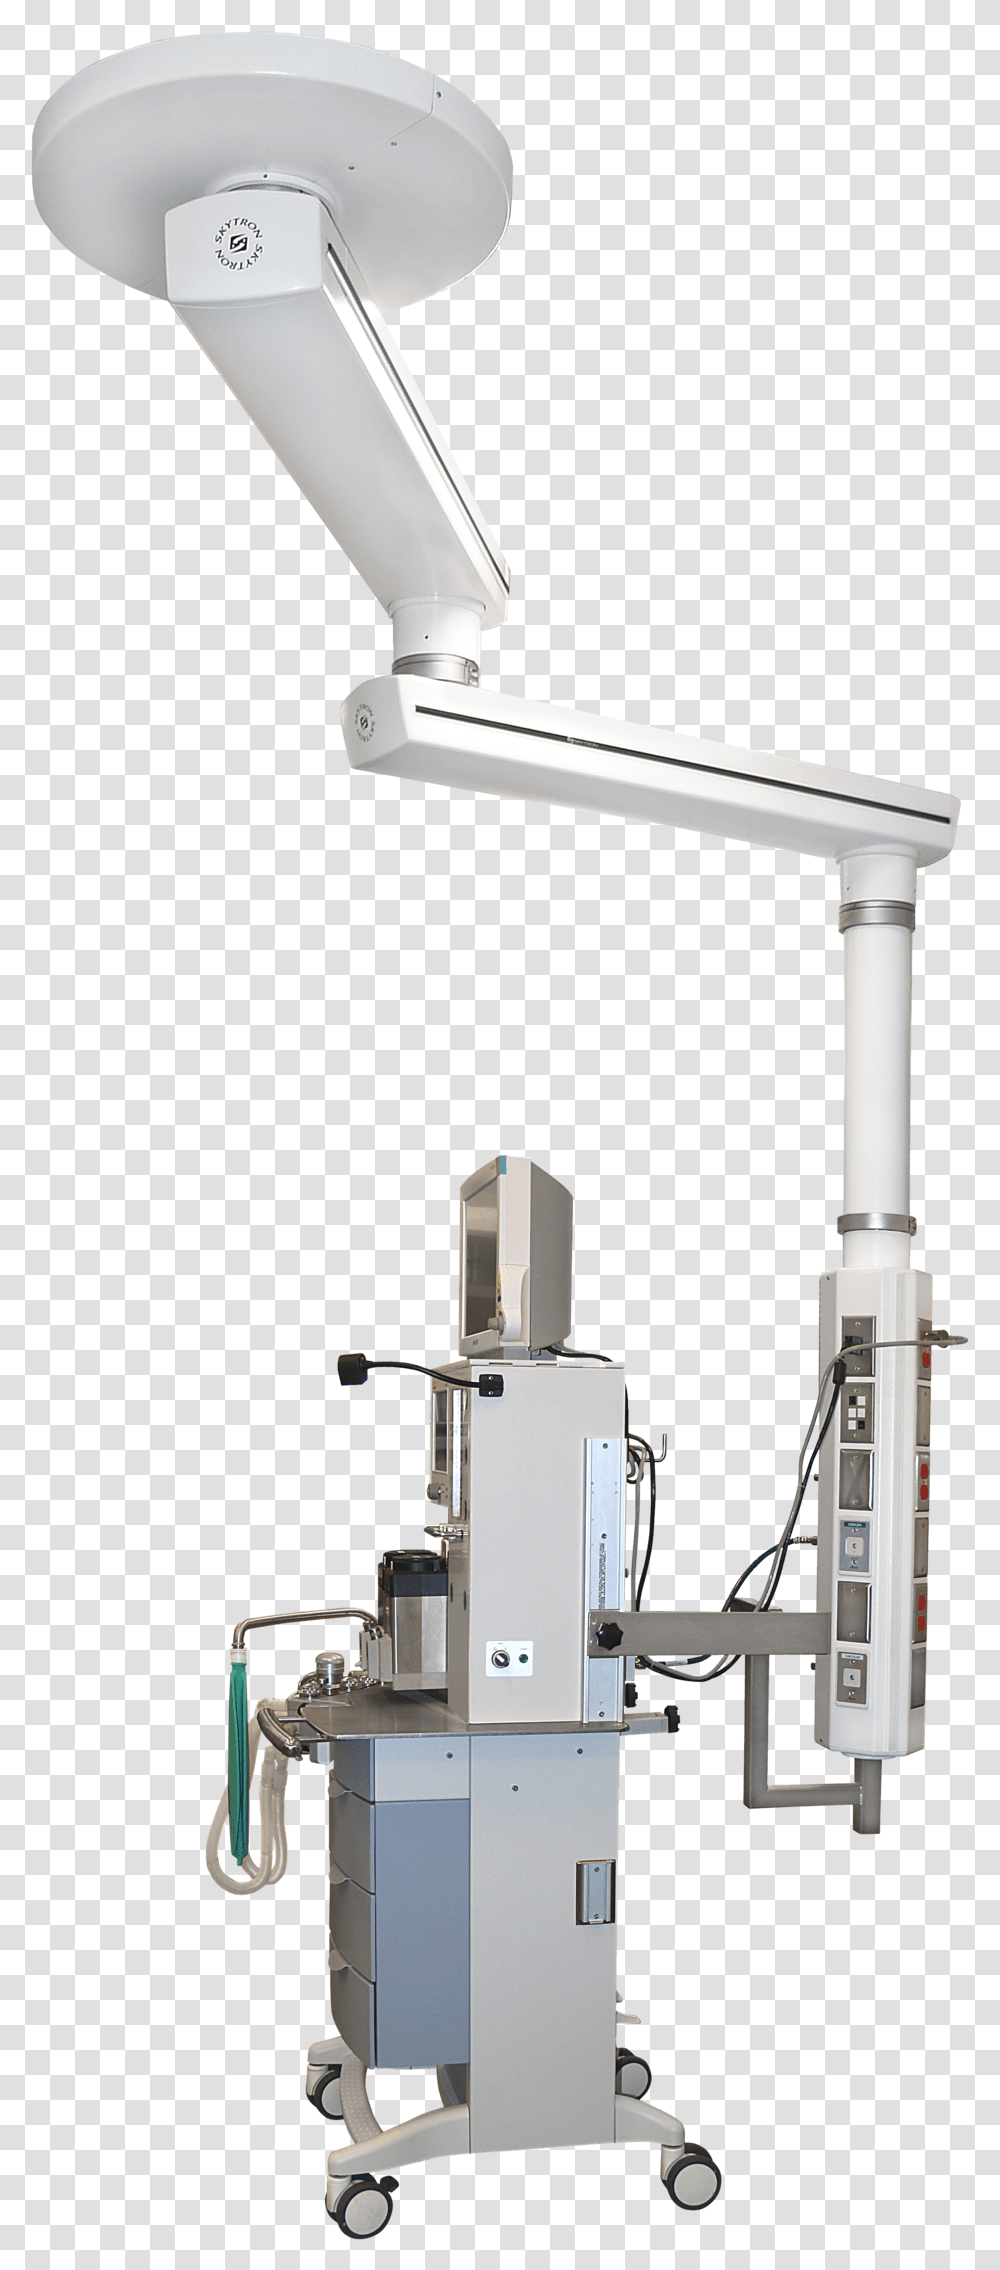 Tether Anesthesia Boom Anesthesia Machine On Pendant, Shower Faucet, Sink Faucet Transparent Png